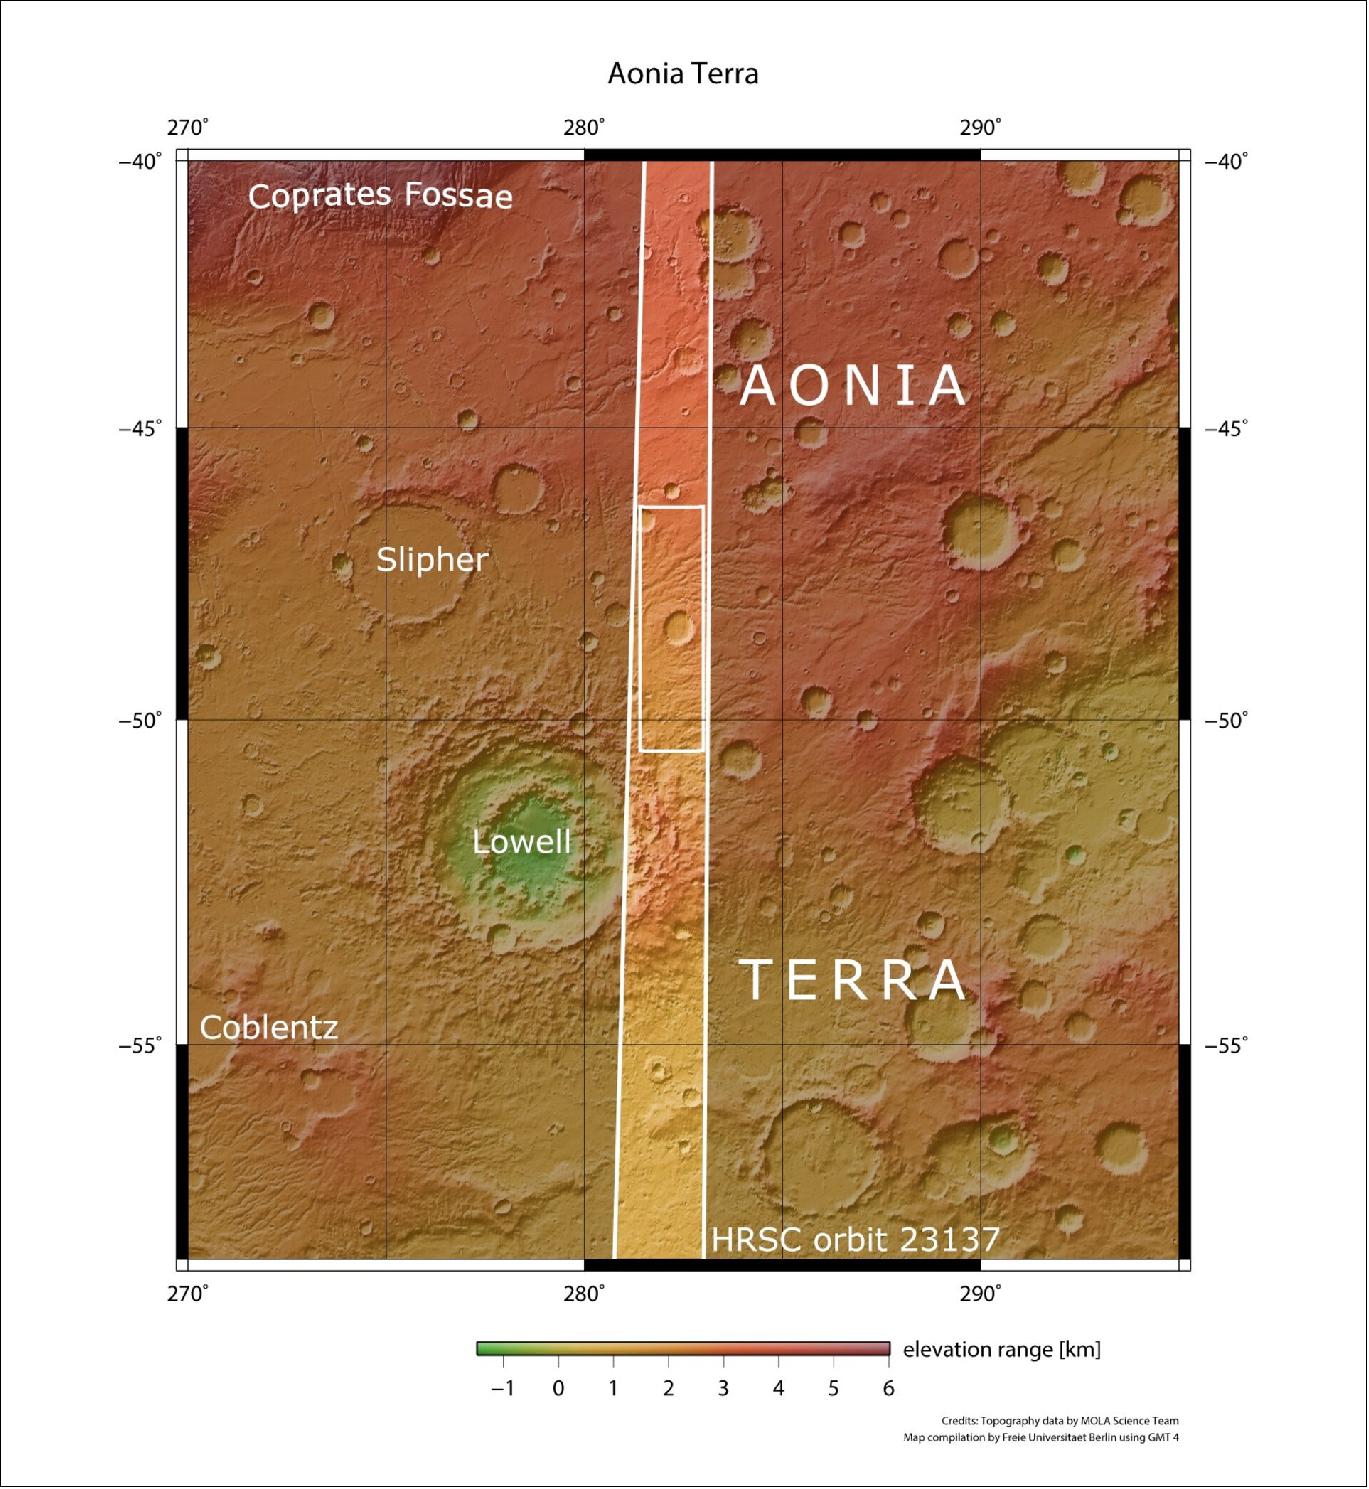 Figure 16: Aonia Terra in context. This image from ESA’s Mars Express shows part of the scarred and colourful landscape that makes up Aonia Terra, an upland region in the southern highlands of Mars. The area outlined by the bold white box indicates the area imaged by the Mars Express High Resolution Stereo Camera on 25 April 2022 during orbit 23137 (image credit: NASA/MGS/MOLA Science Team)